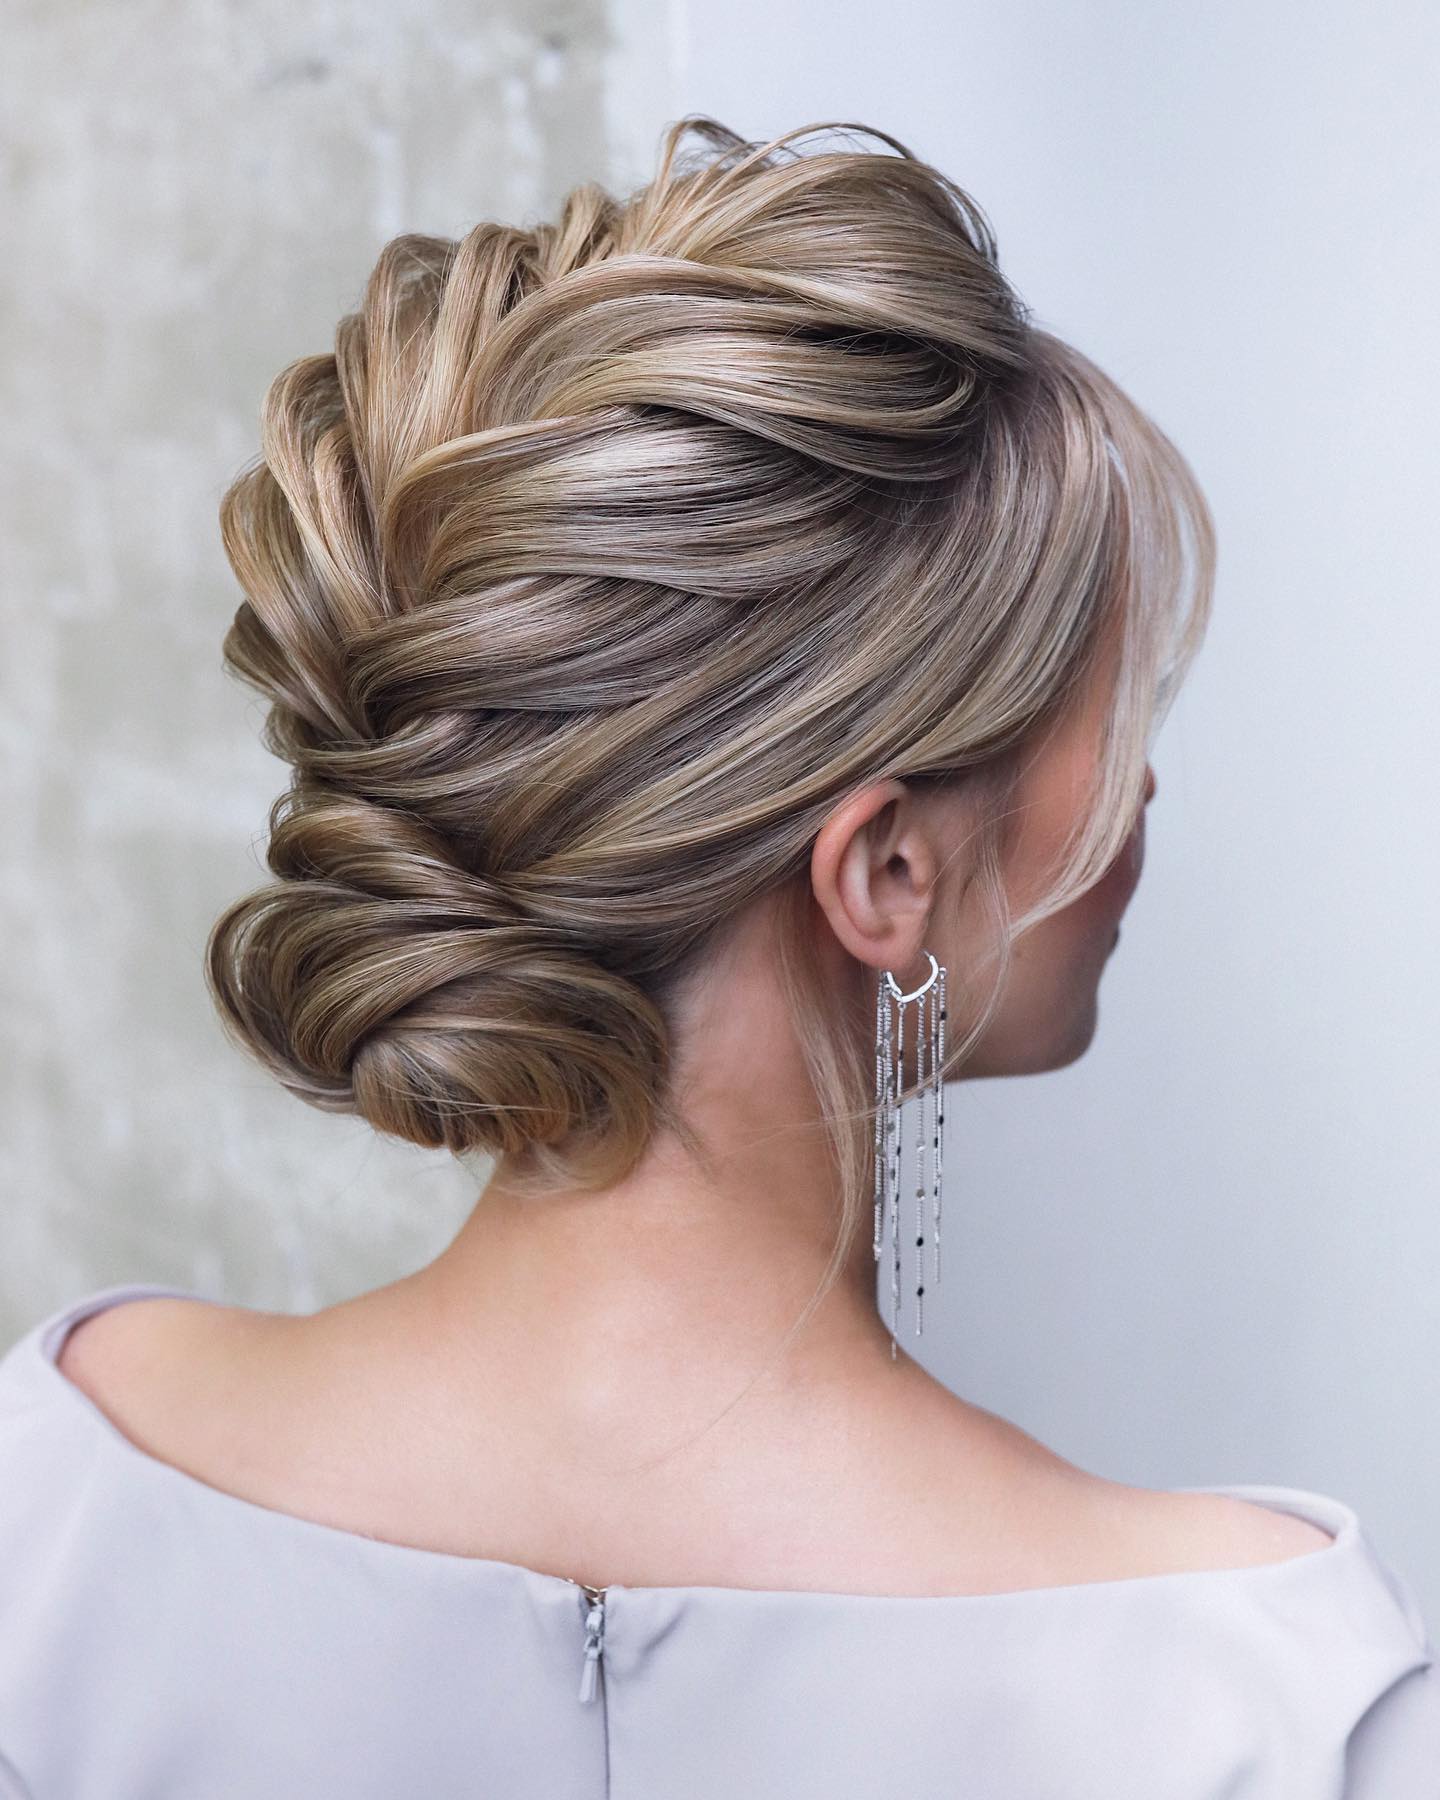 14 Attractive Hairstyles For Brides With Round Face In 2022 | POPxo